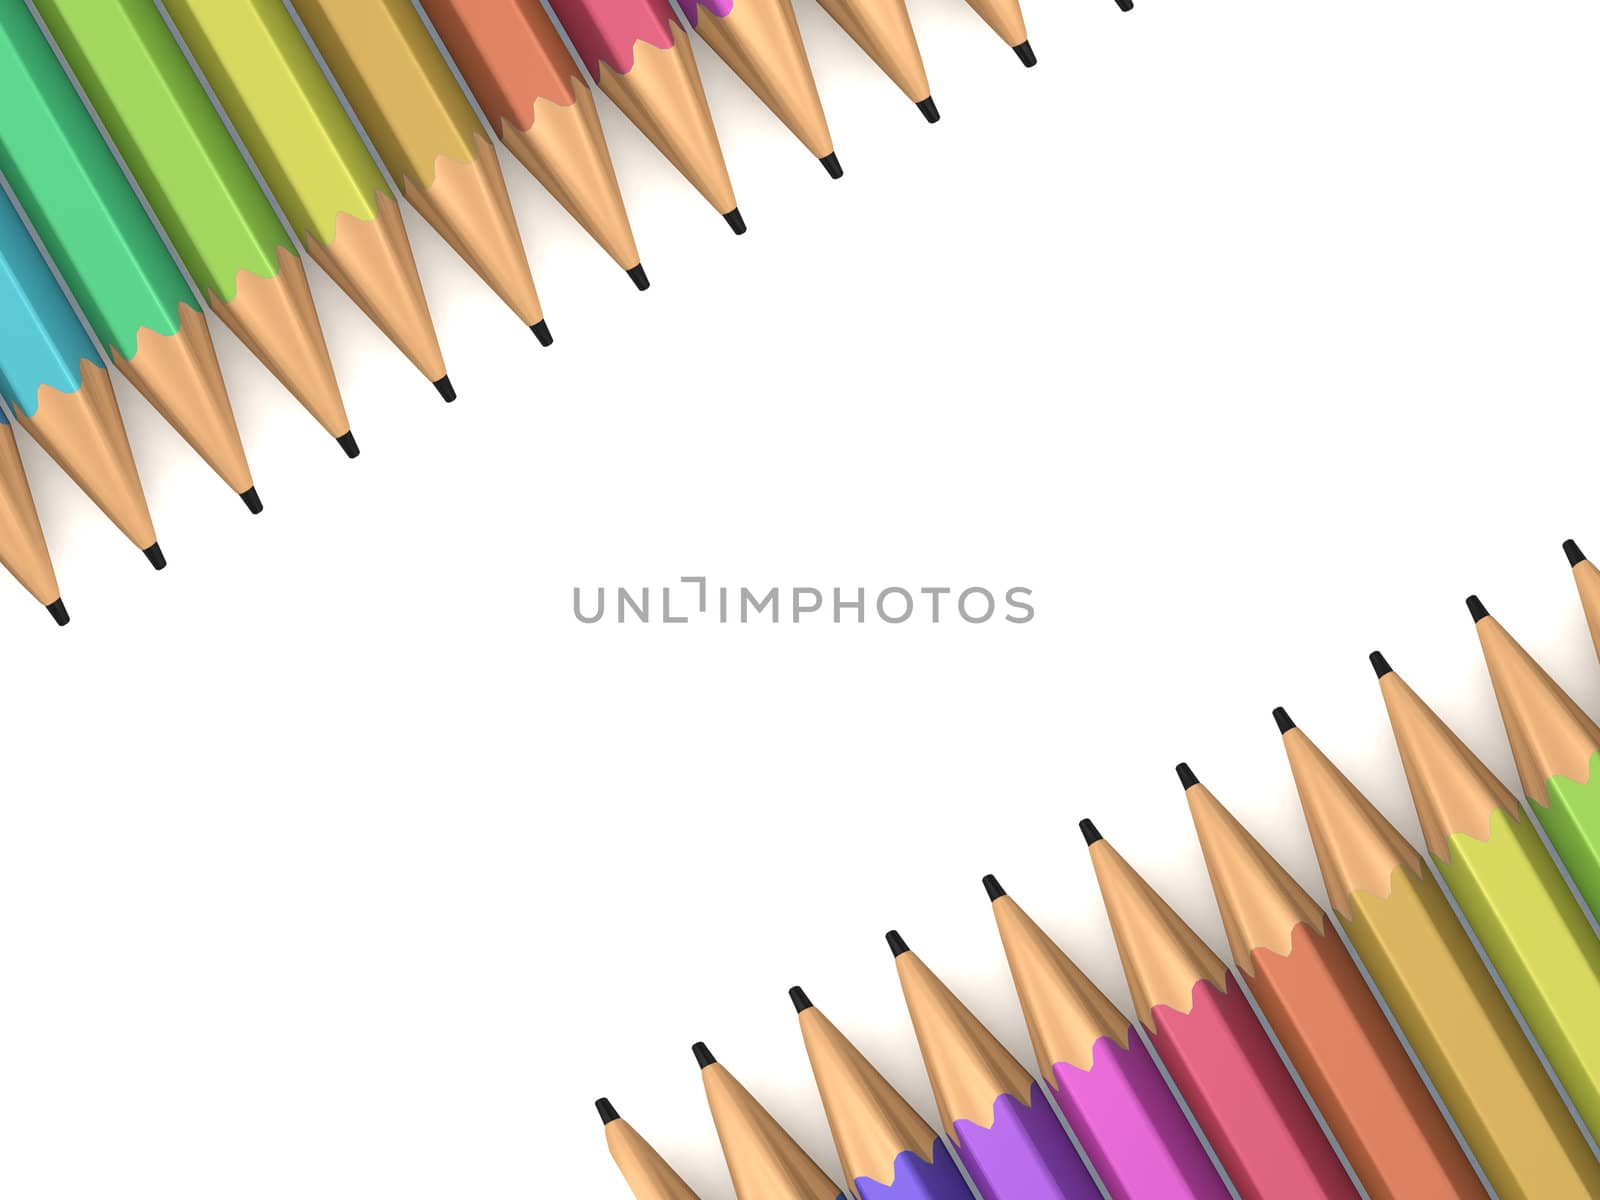 Colorful pencils in a row on white background.